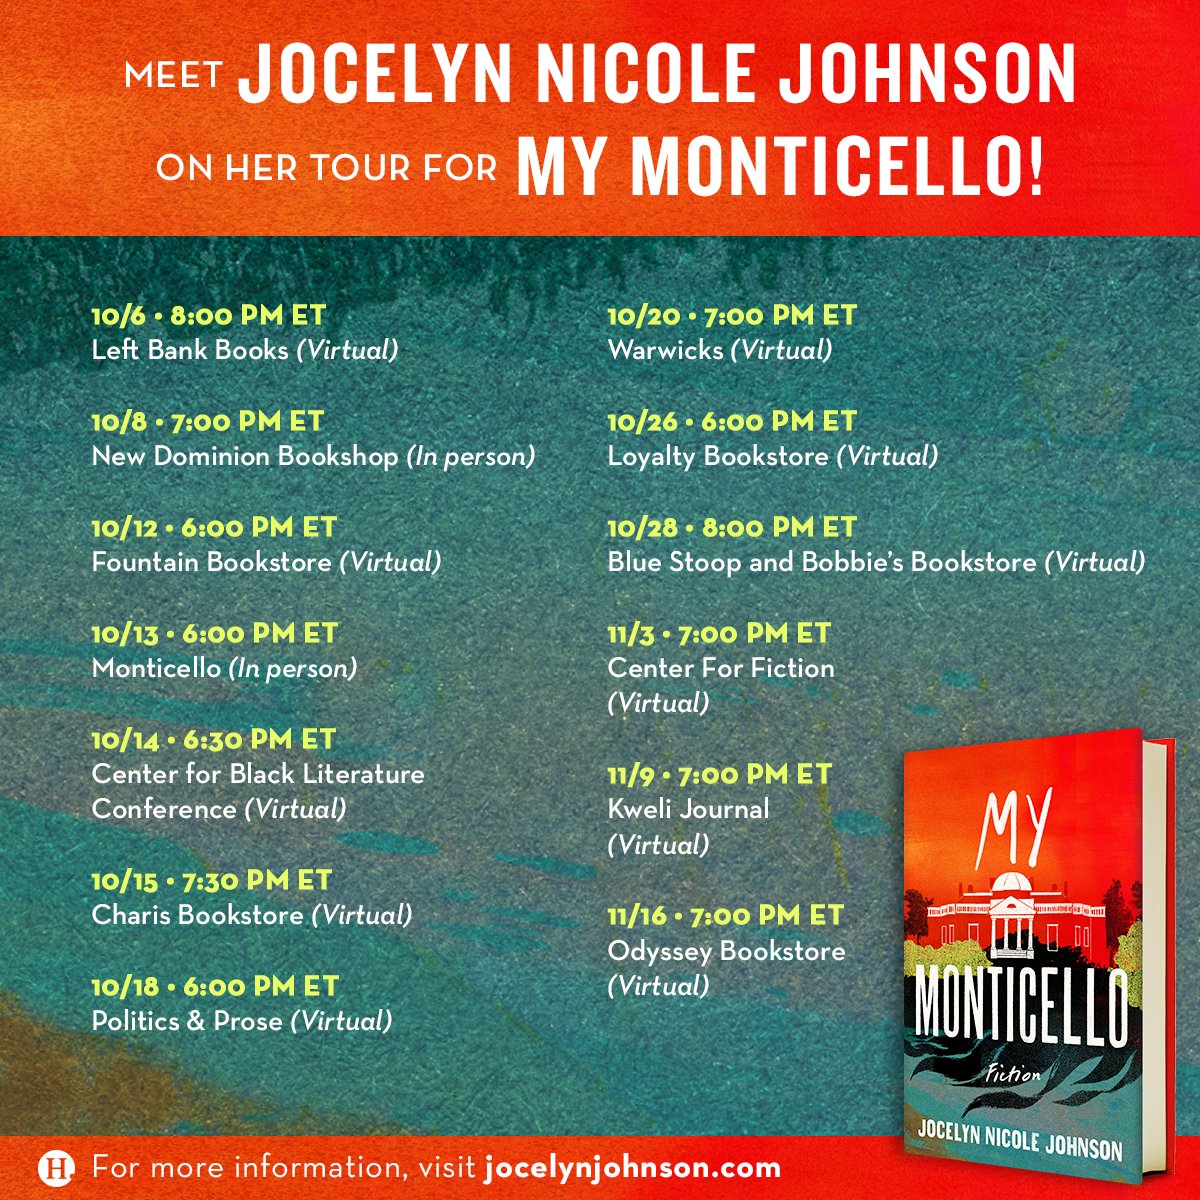 Meet @jocelynjohnson on her tour for MY MONTICELLO! She'll be virtually stopping by @LeftBankBooks, @FountainBkstore, @chariscircle, @PoliticsProse, @warwicksbooks, @Loyaltybooks, @Center4Fiction, and more! For full details, visit ow.ly/QfT550GjGYE ✨